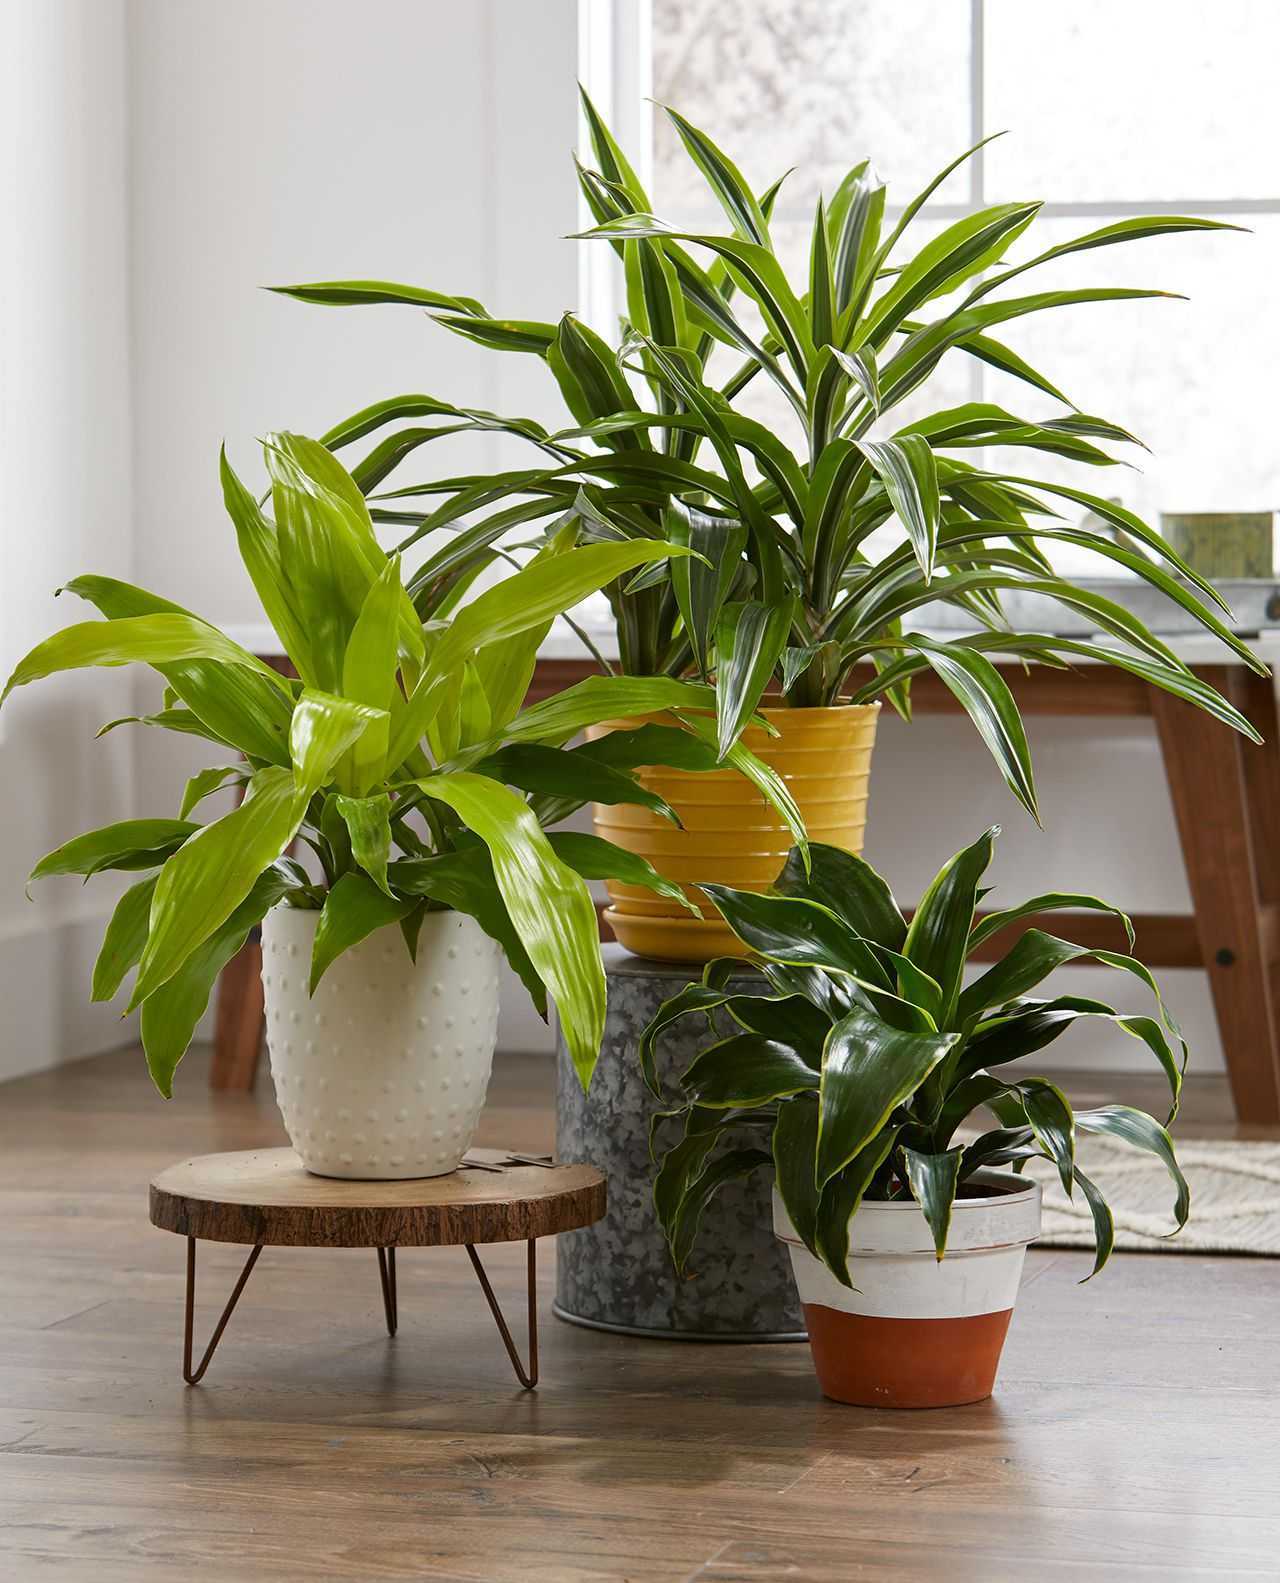 Large, Healthy, Happy Plants! House or Outside-pic_2